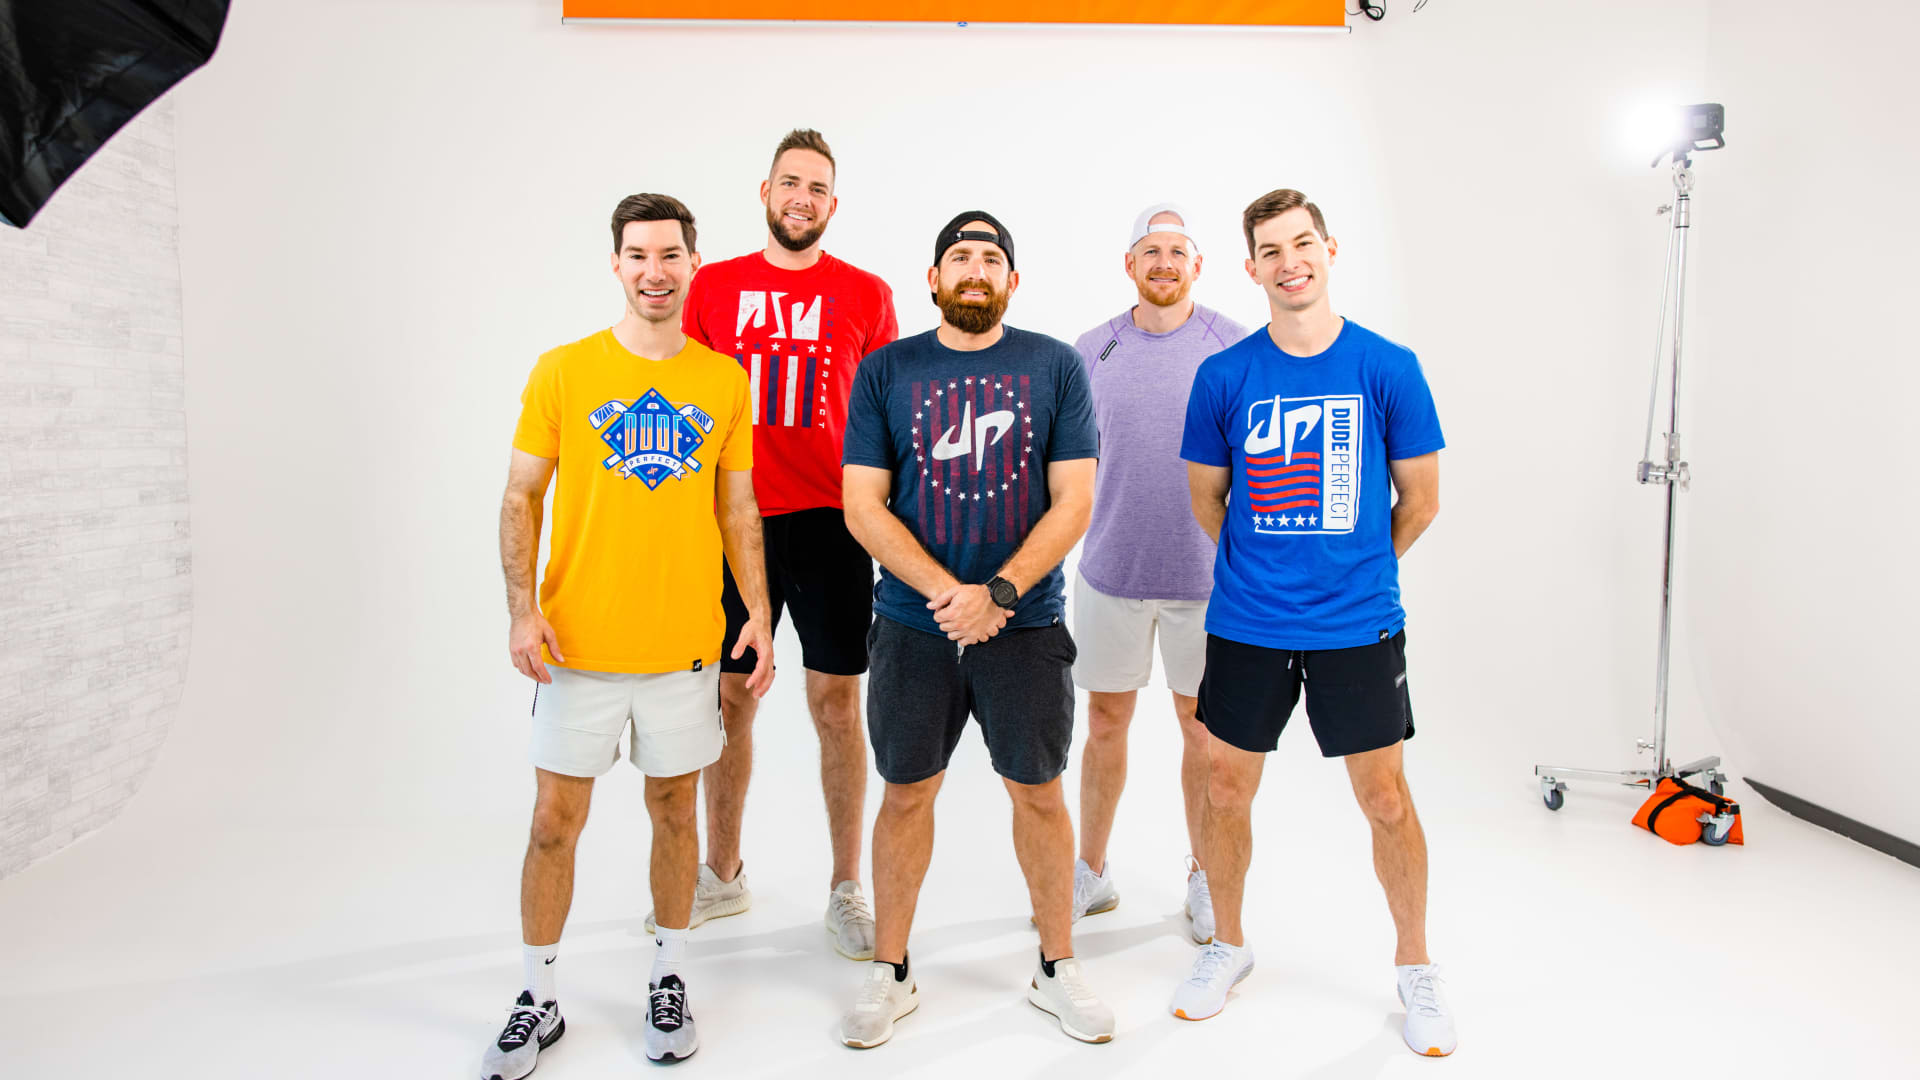 Popular YouTube channel Dude Perfect scores more than 0 million investment